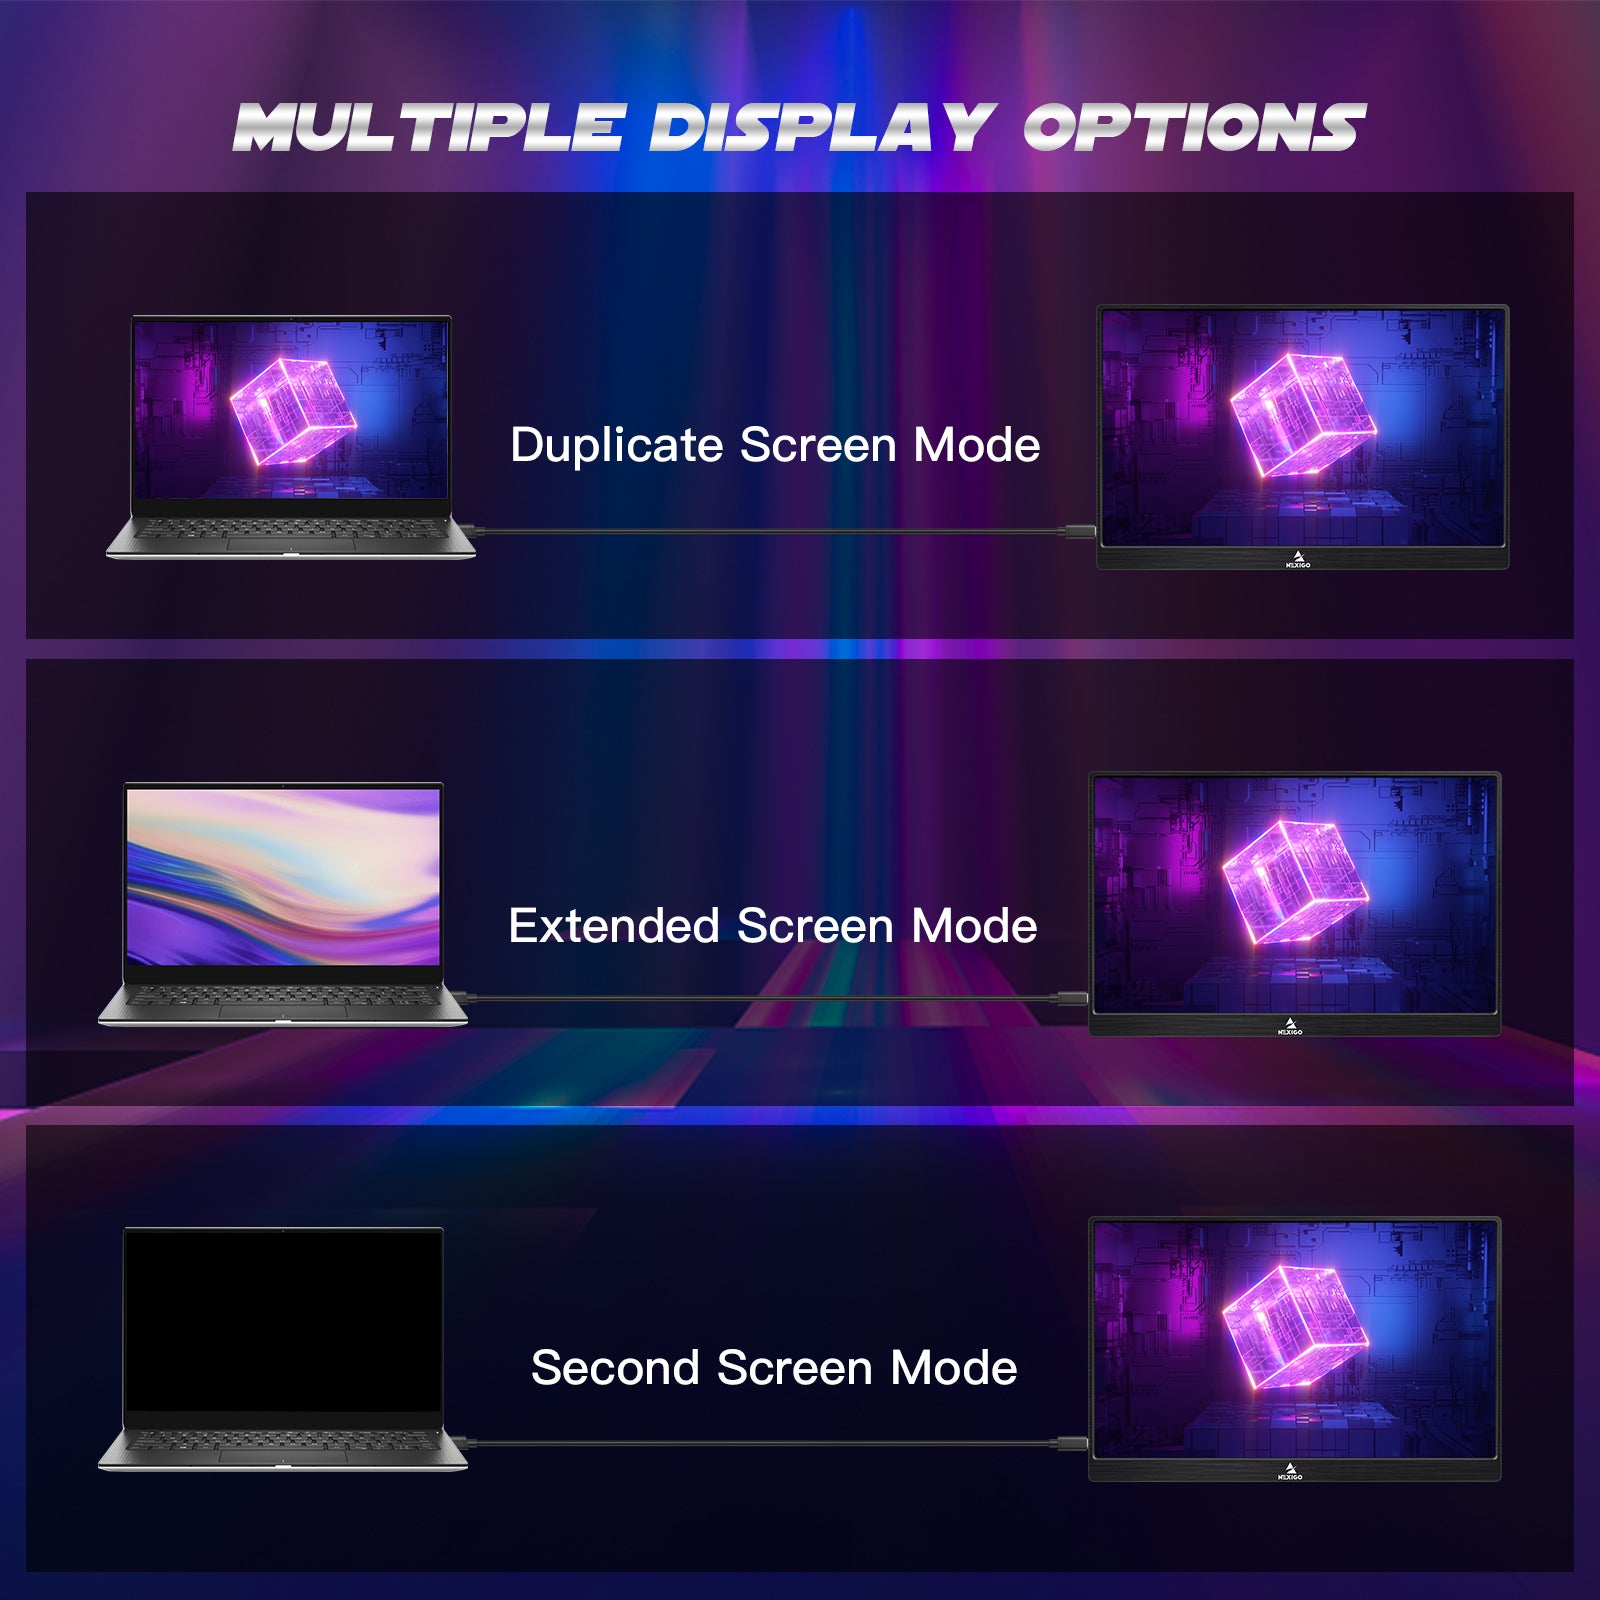 Portable monitor supports Duplicate, Extended, and Second Screen modes with laptops